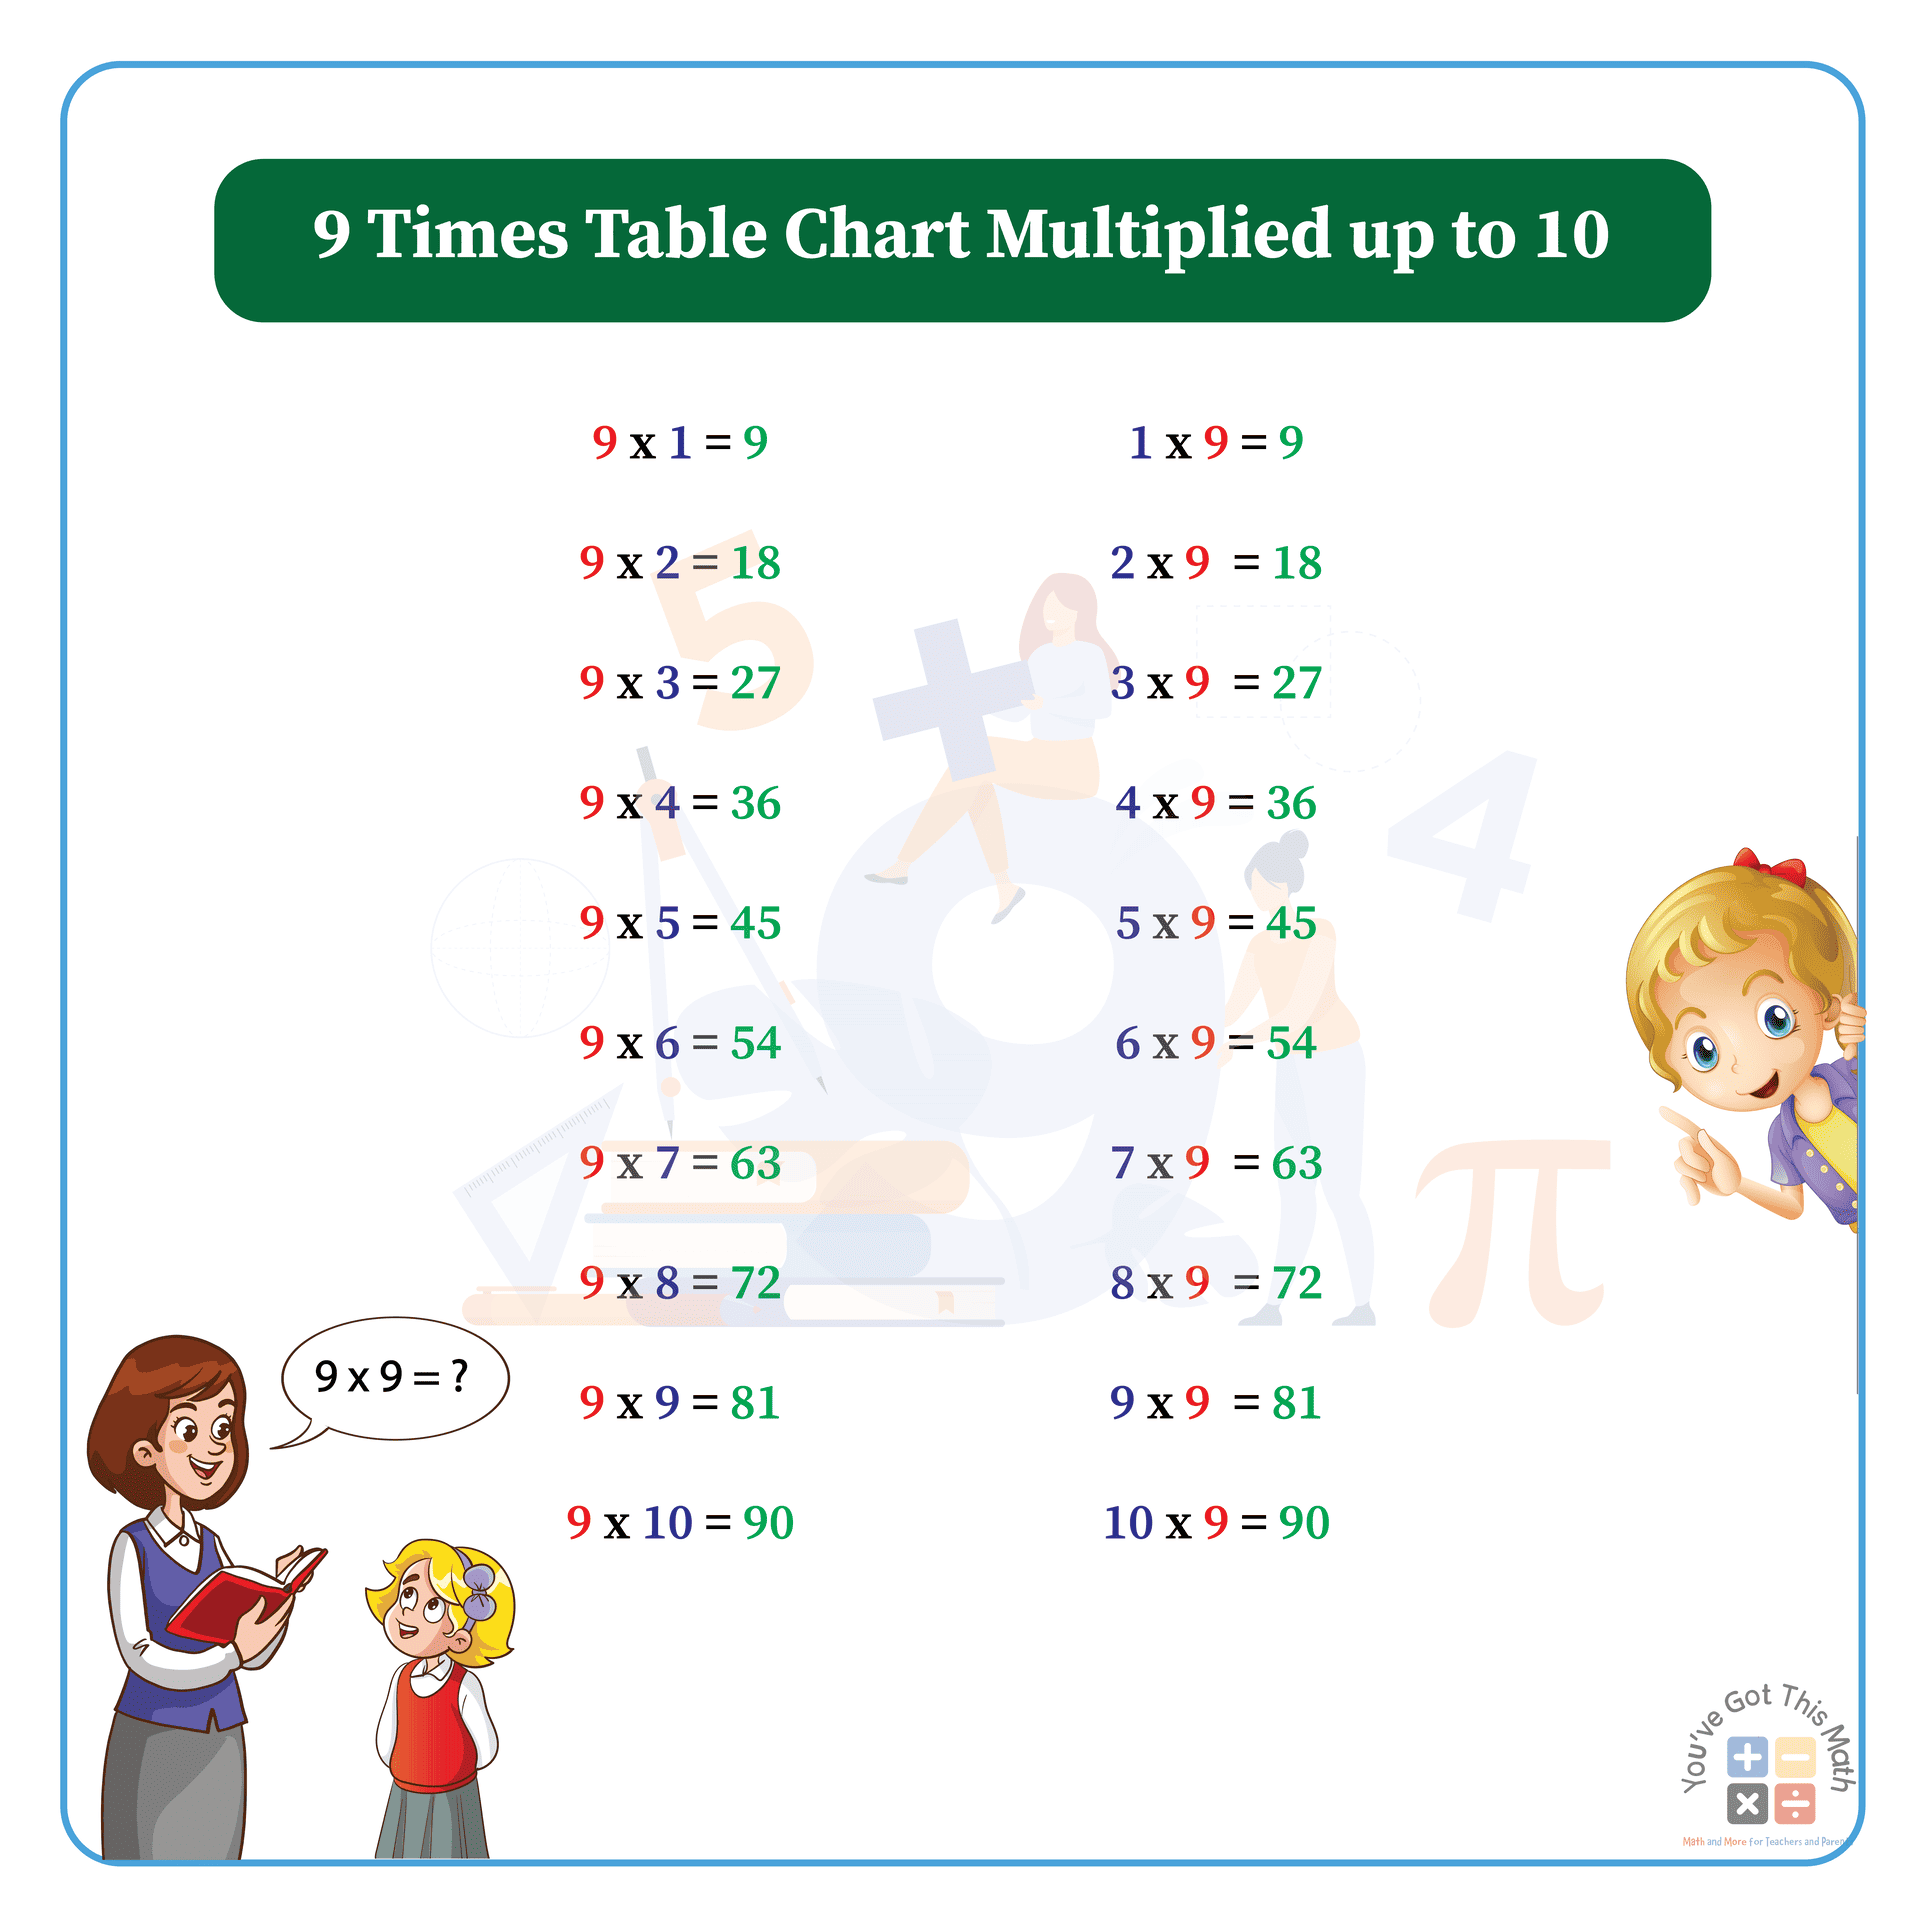 9 times table chart multiplied up to 10